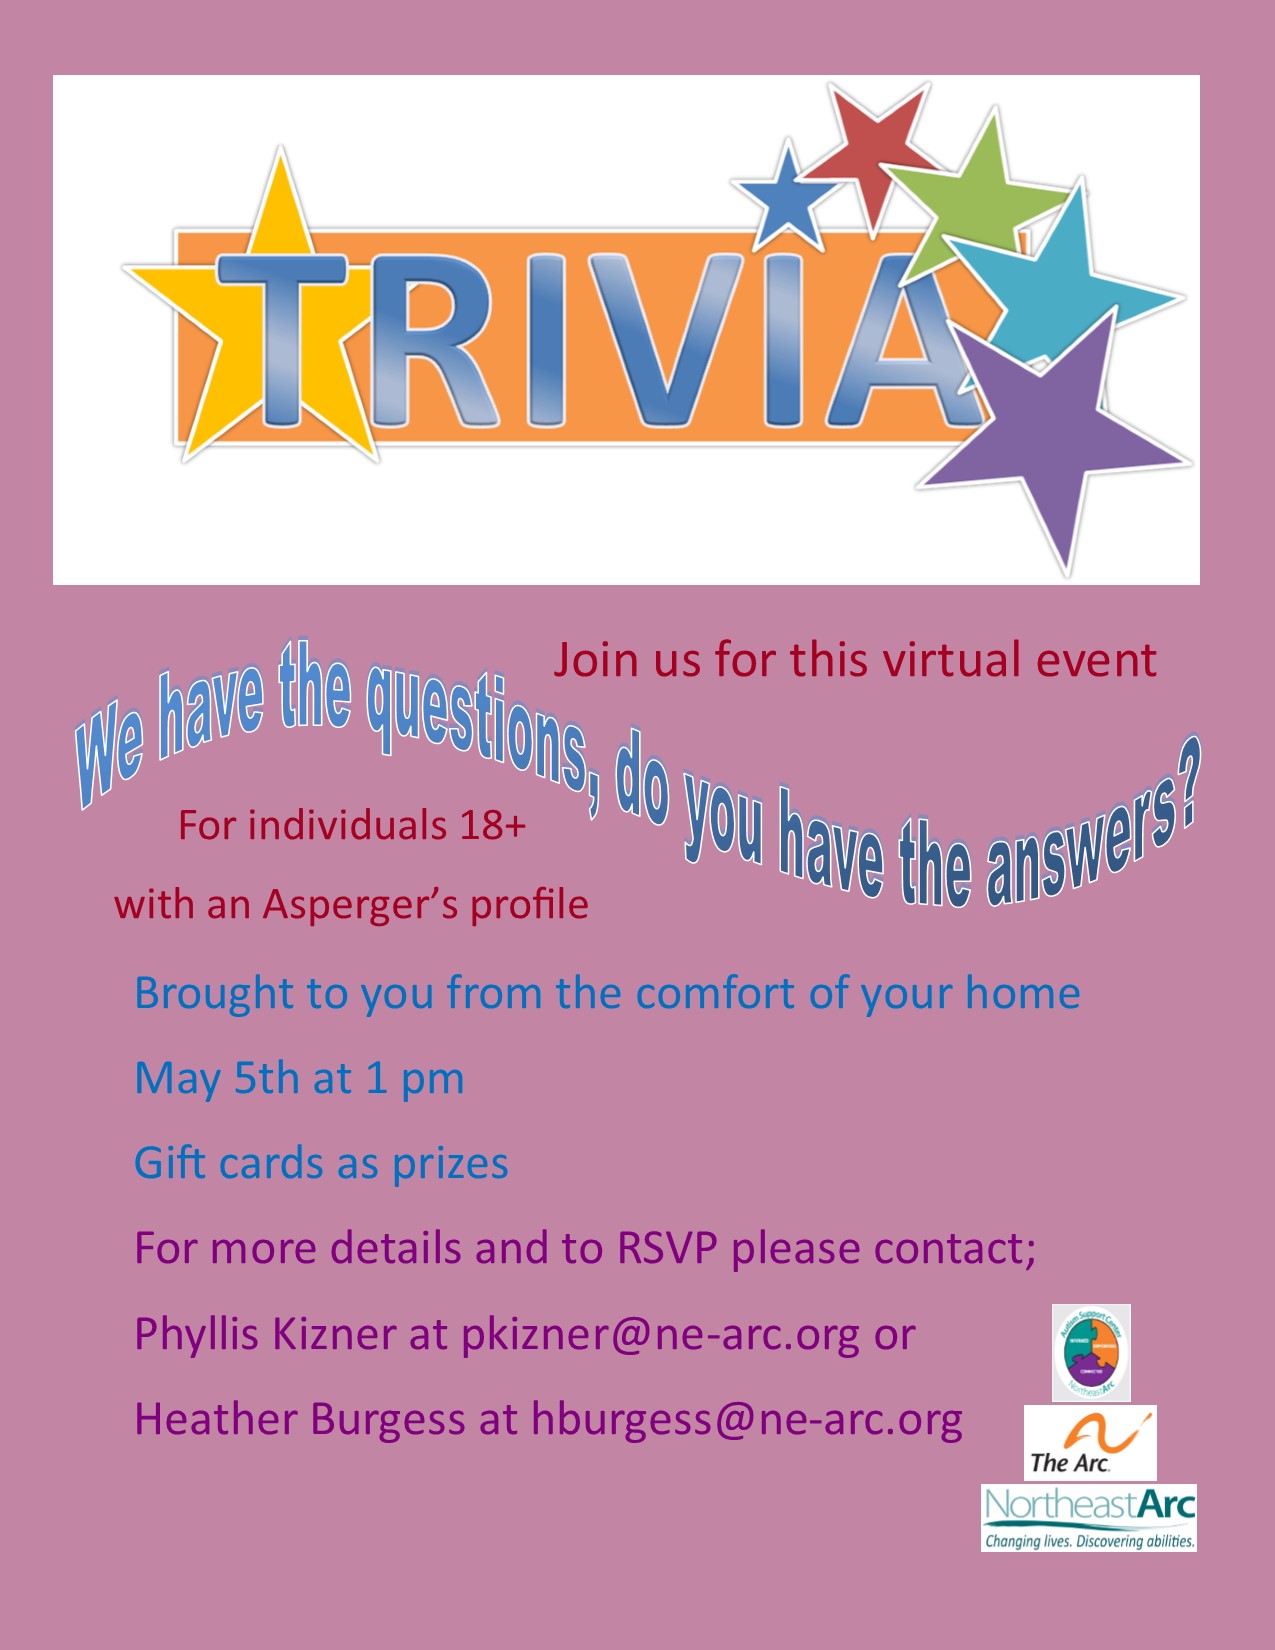 Flyer for Trivia Event for Adults with Asperger's Profile